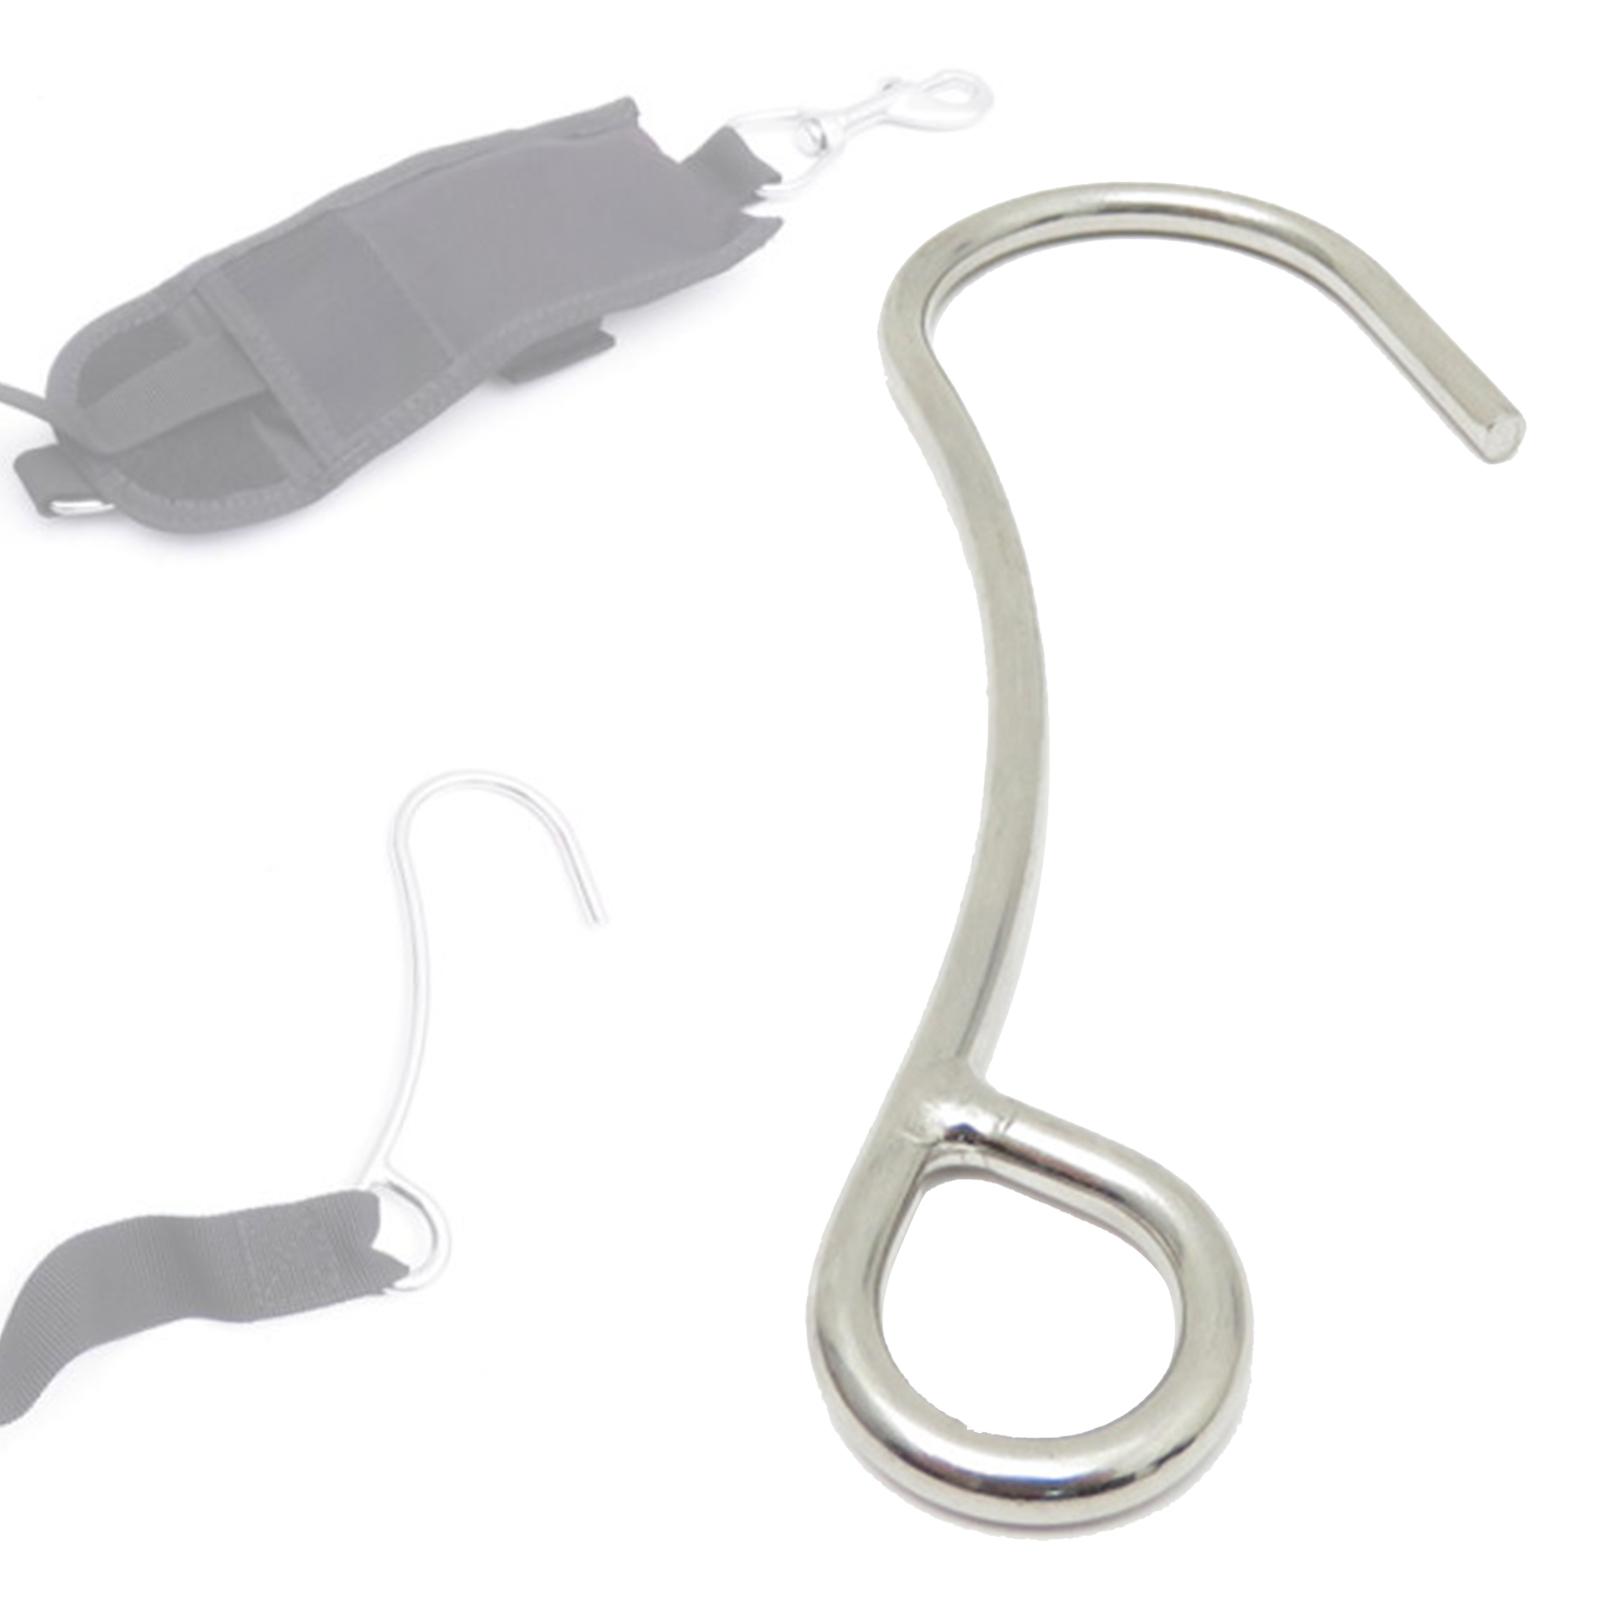 Stainless Steel Scuba Diving Reef Hook Durable for Cave Diving Free Dive